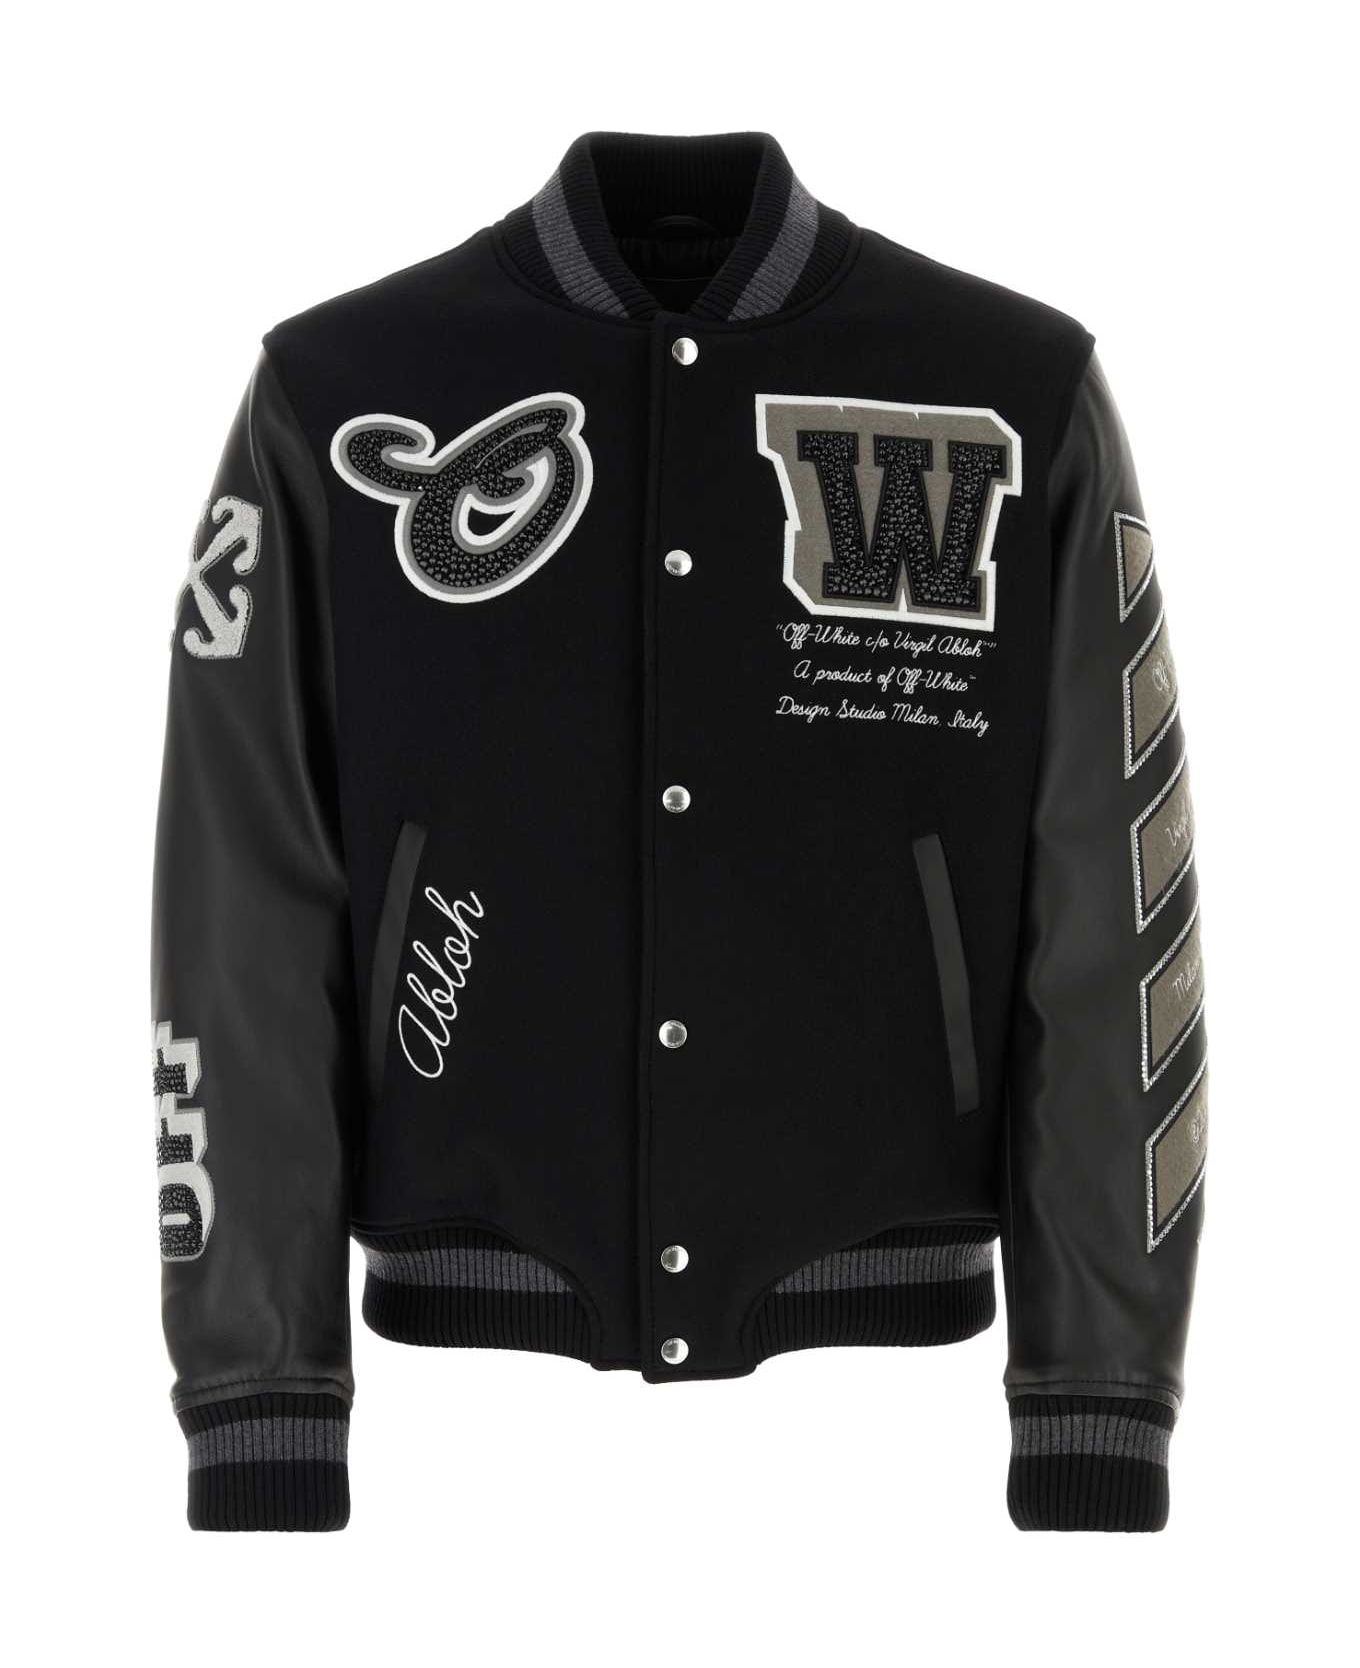 Off-White Black Wool Blend And Leather Bomber Jacket - 1010